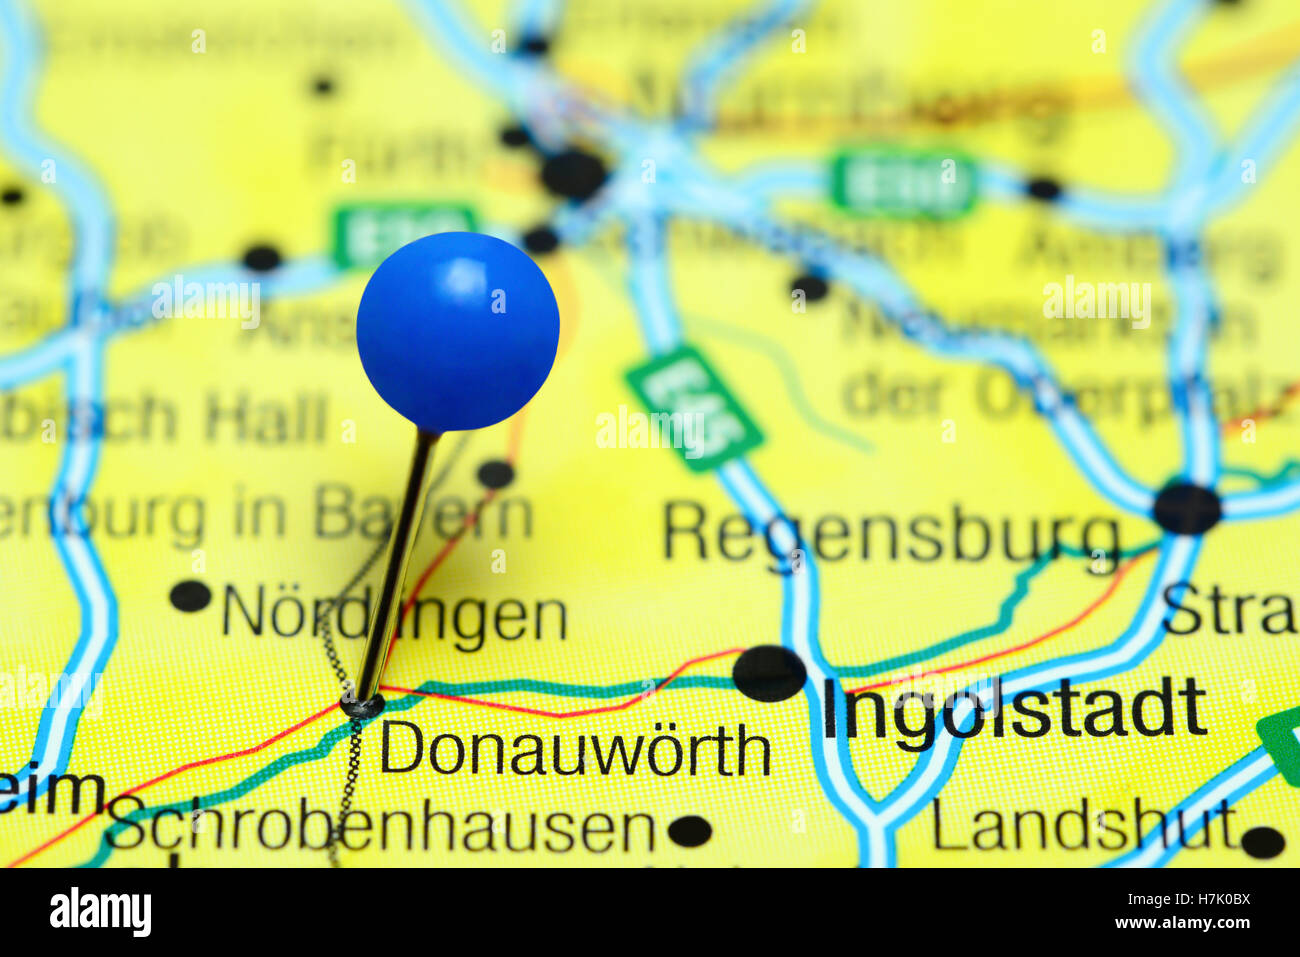 Donauworth pinned on a map of Germany Stock Photo